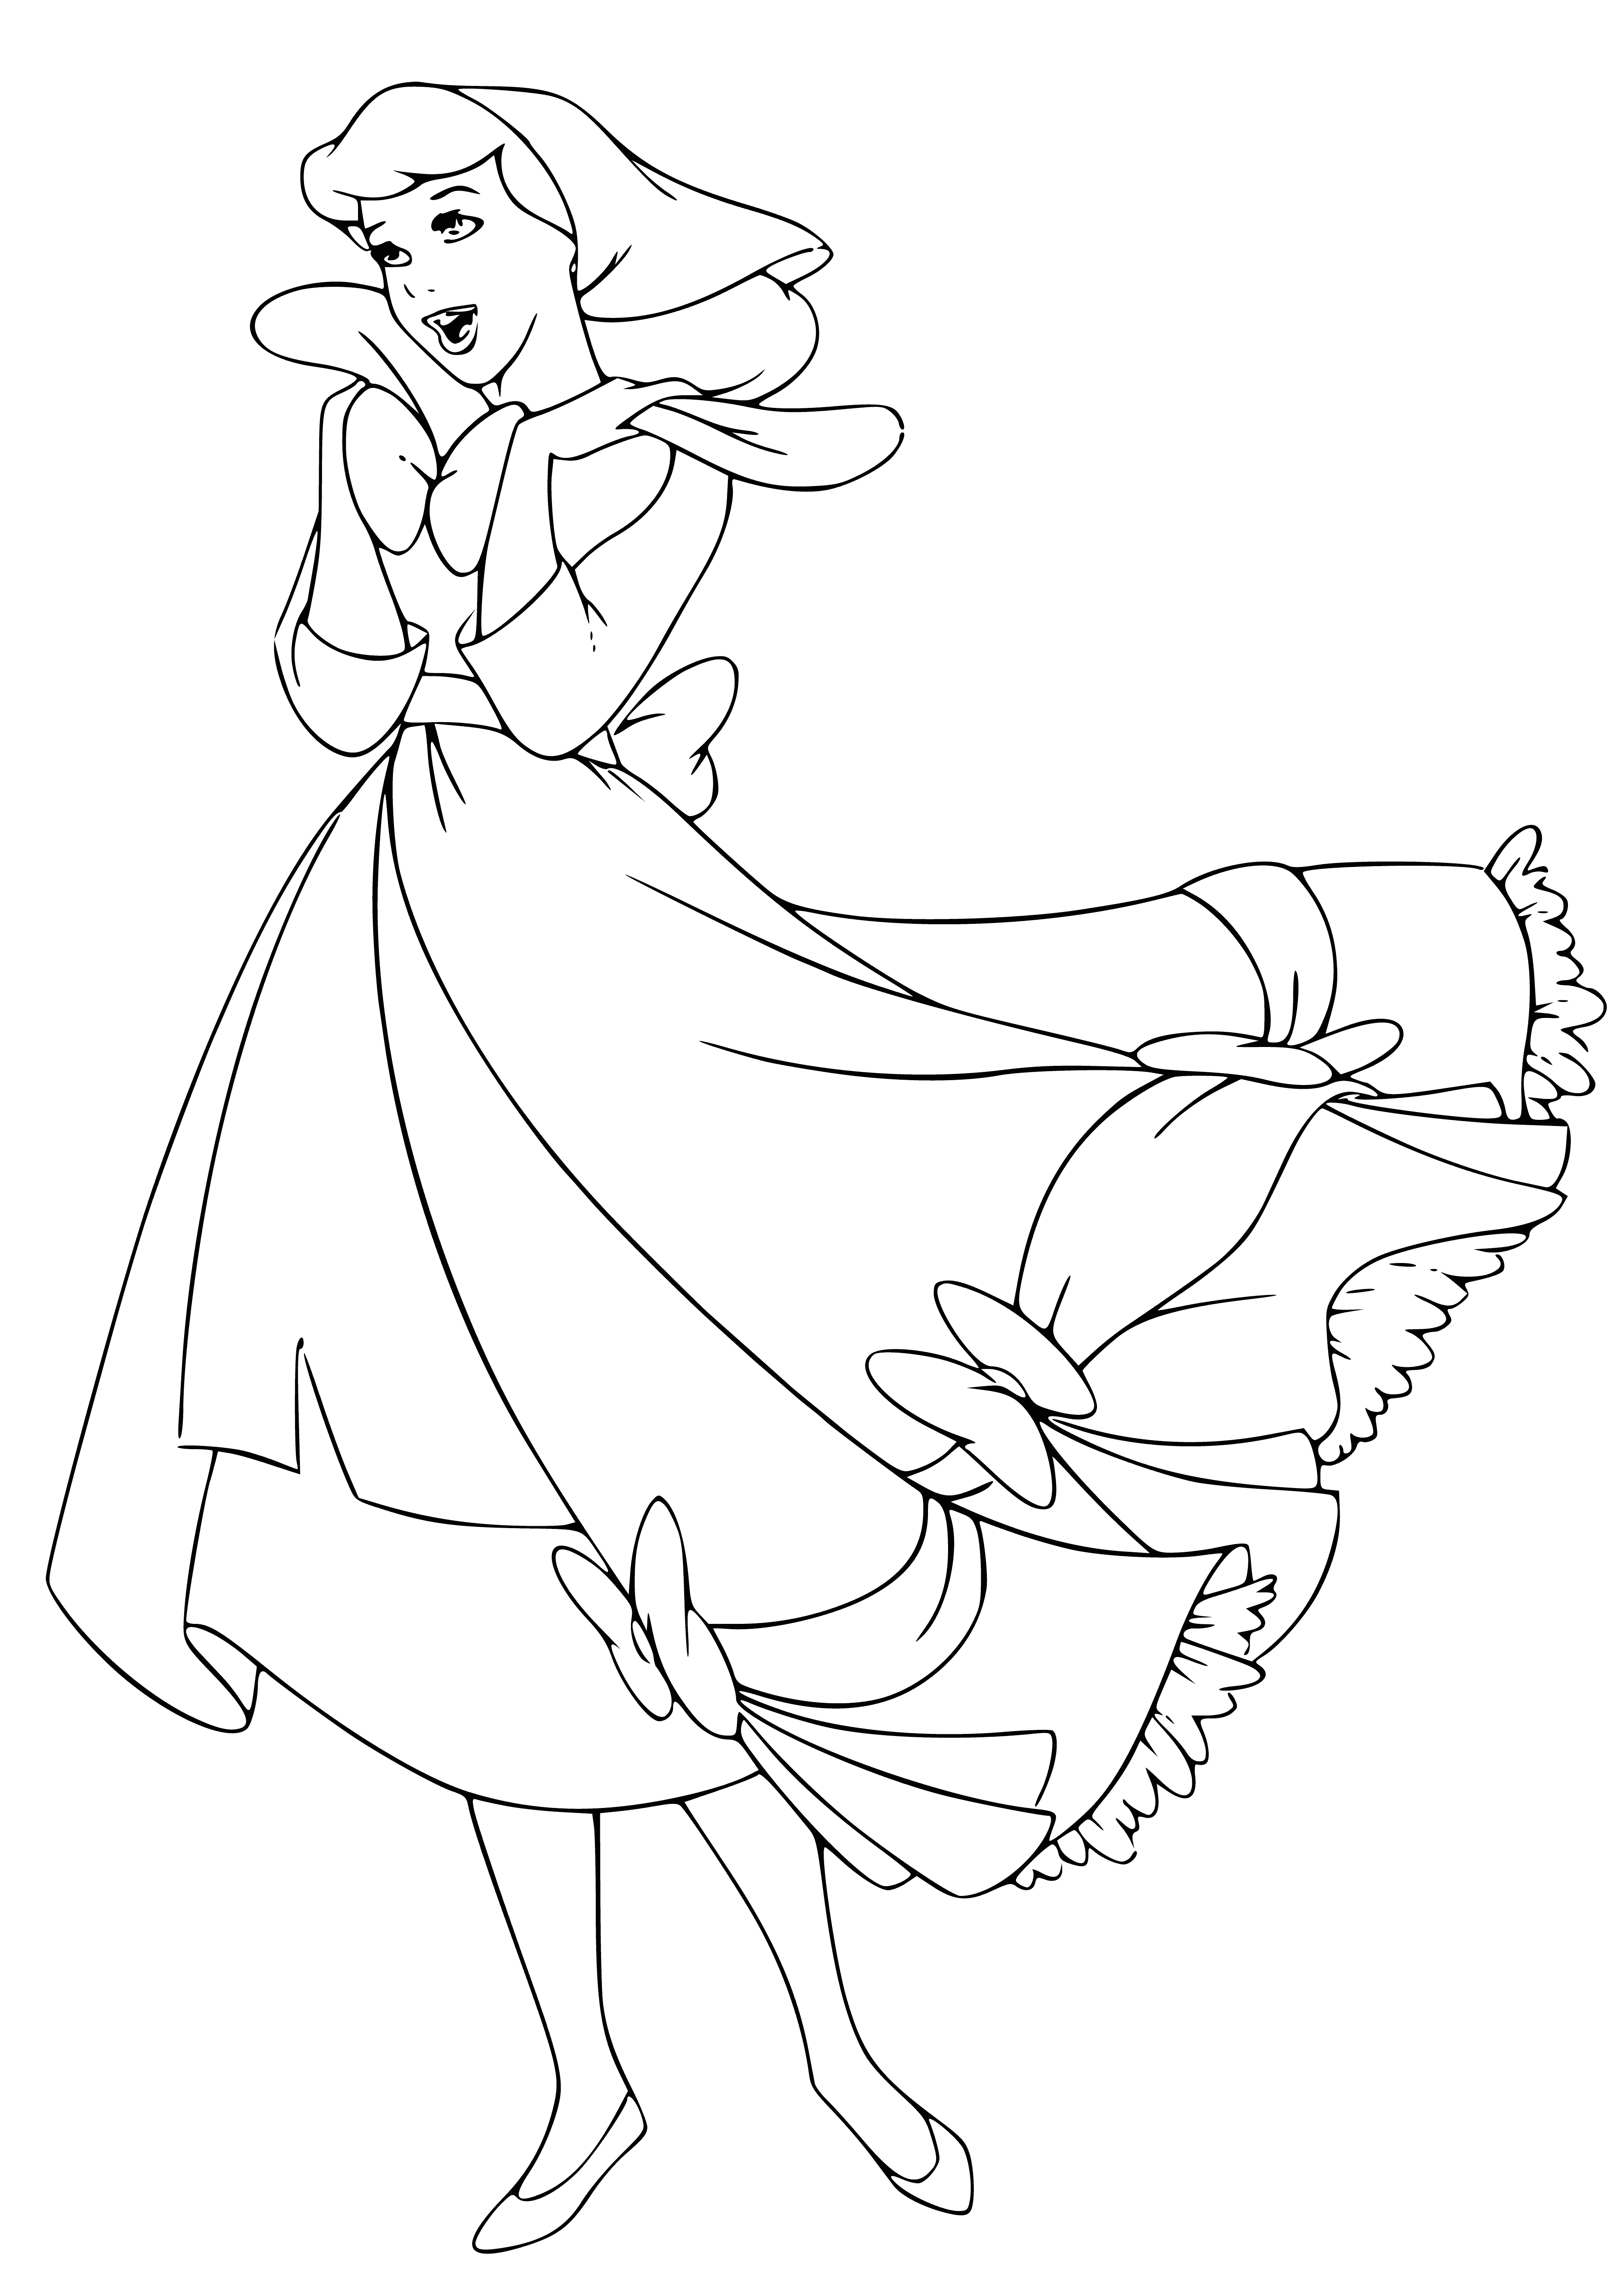 Cinderella will try on a dress coloring page